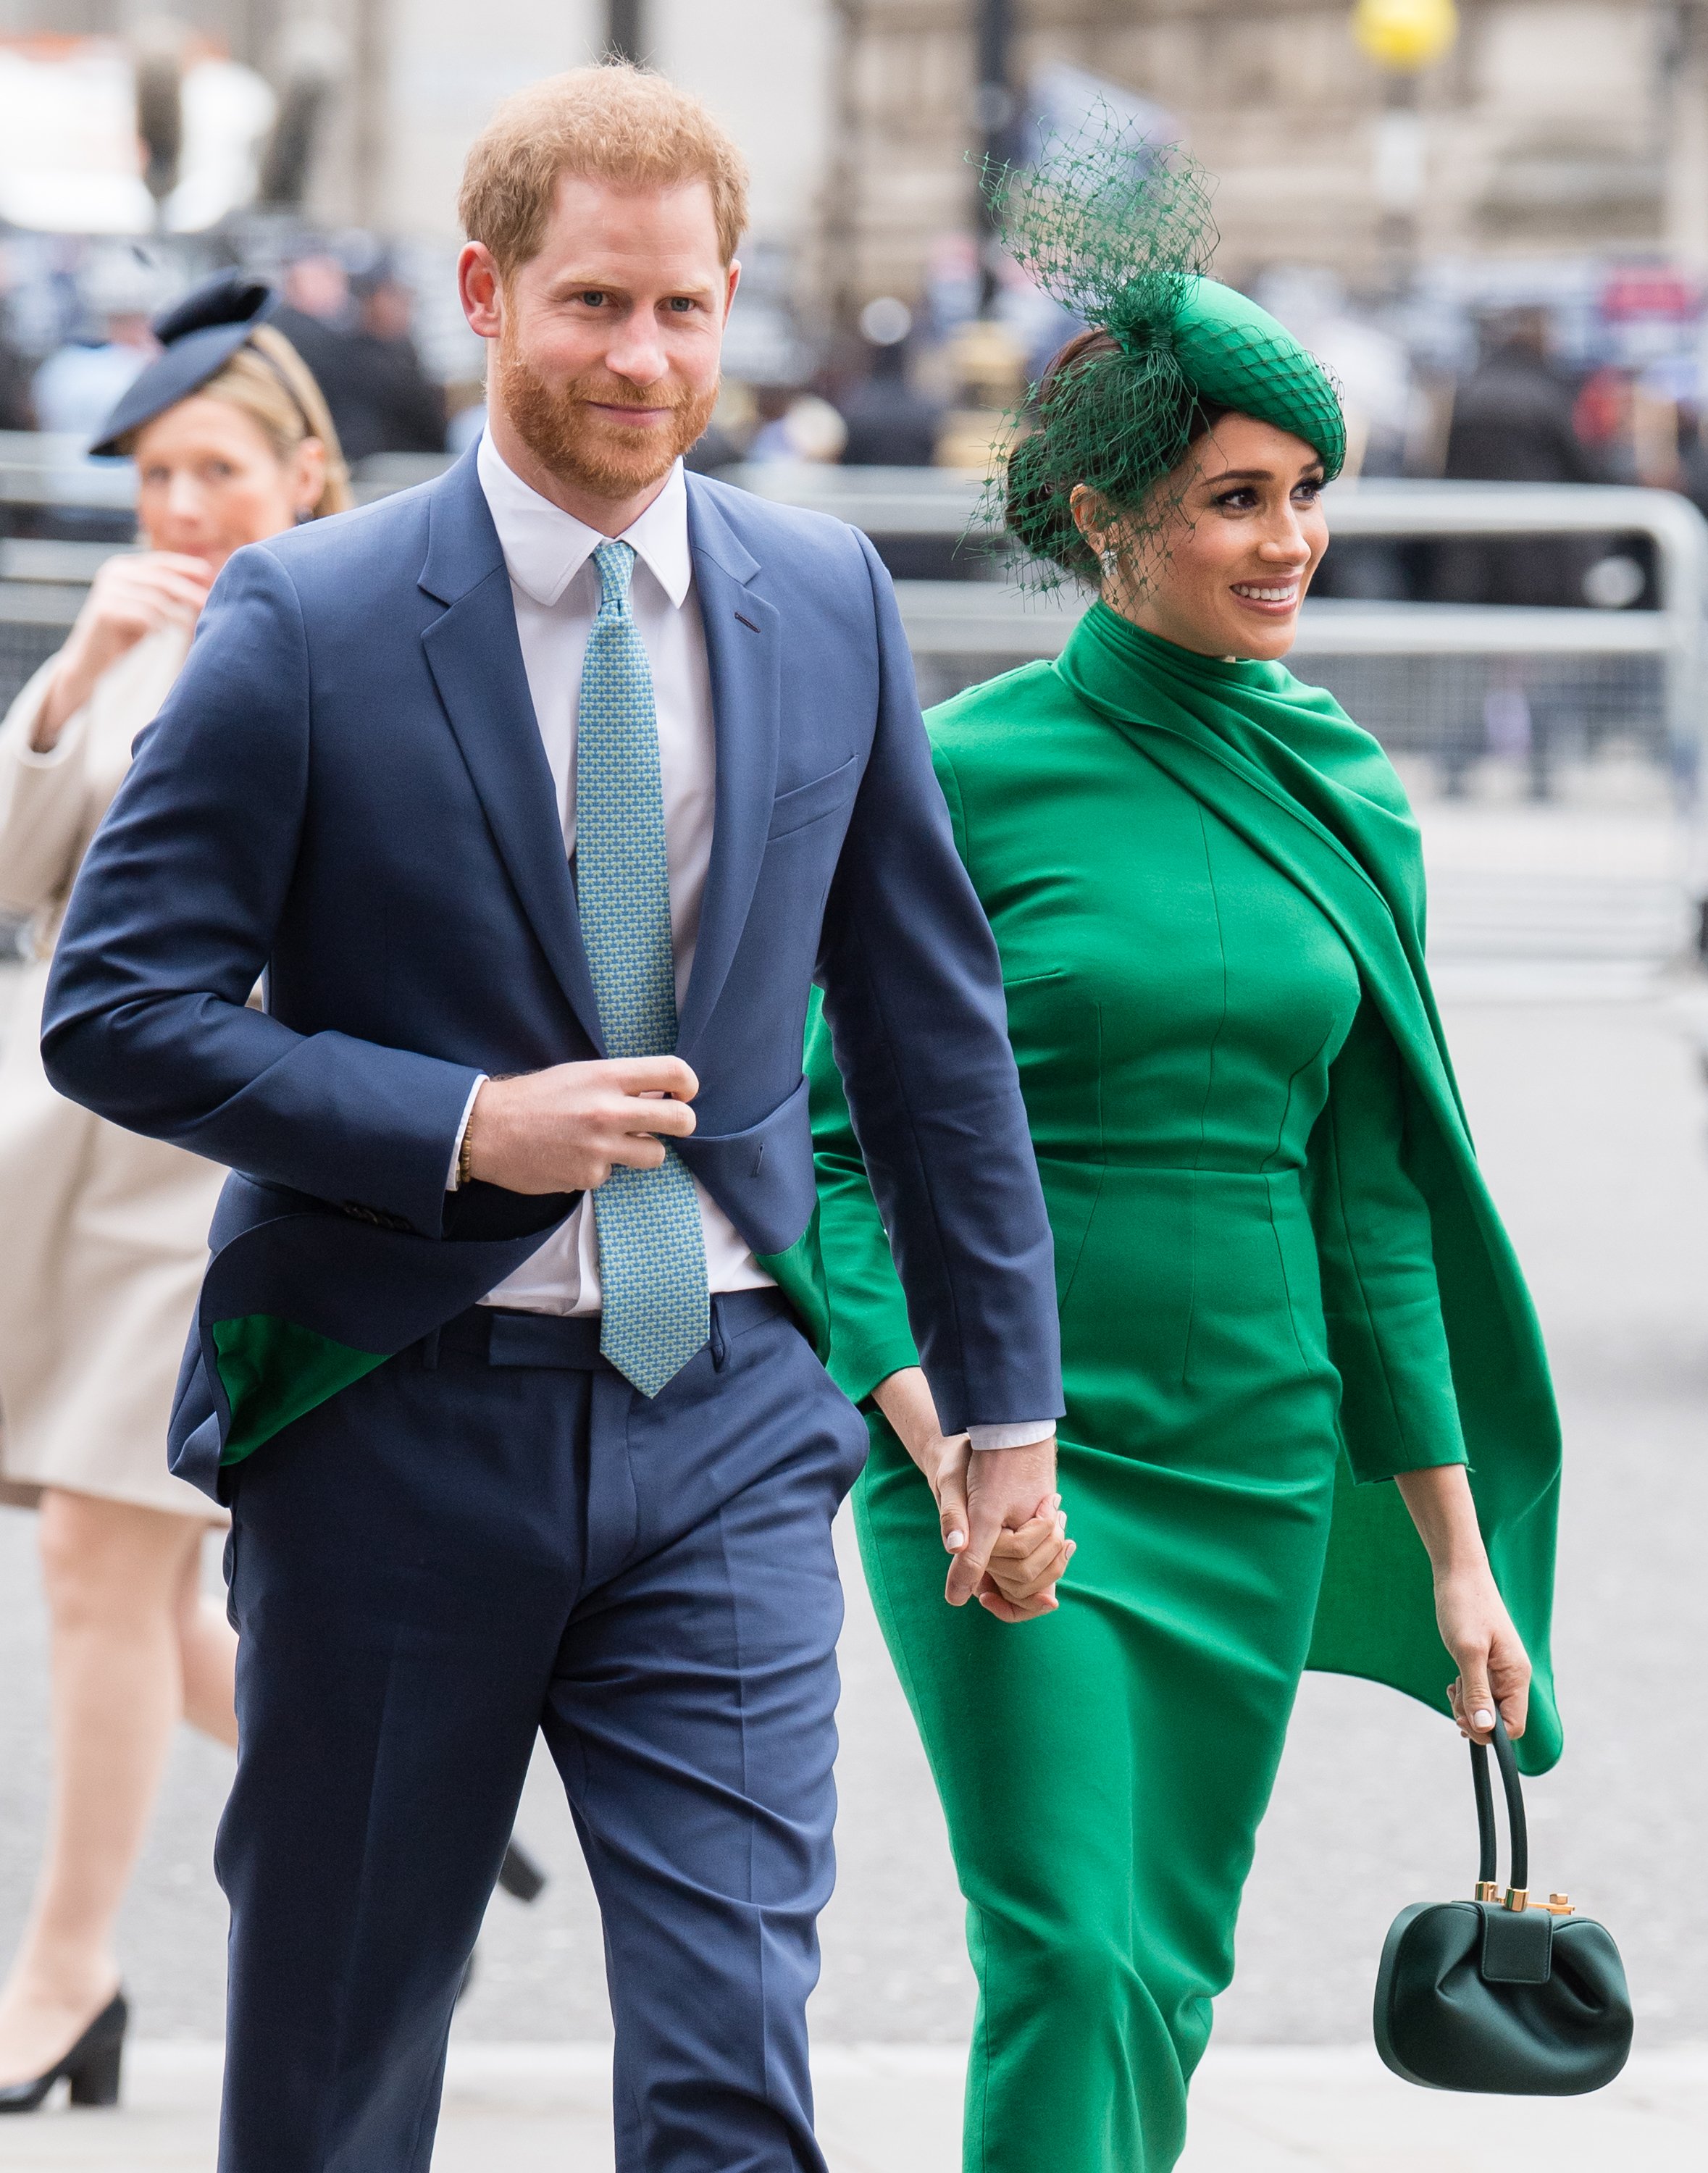 Prince Harry, Duke of Sussex and Meghan, Duchess of Sussex attend the Commonwealth Day Service 2020 on March 09, 2020 in London, England | Photo: Getty Images